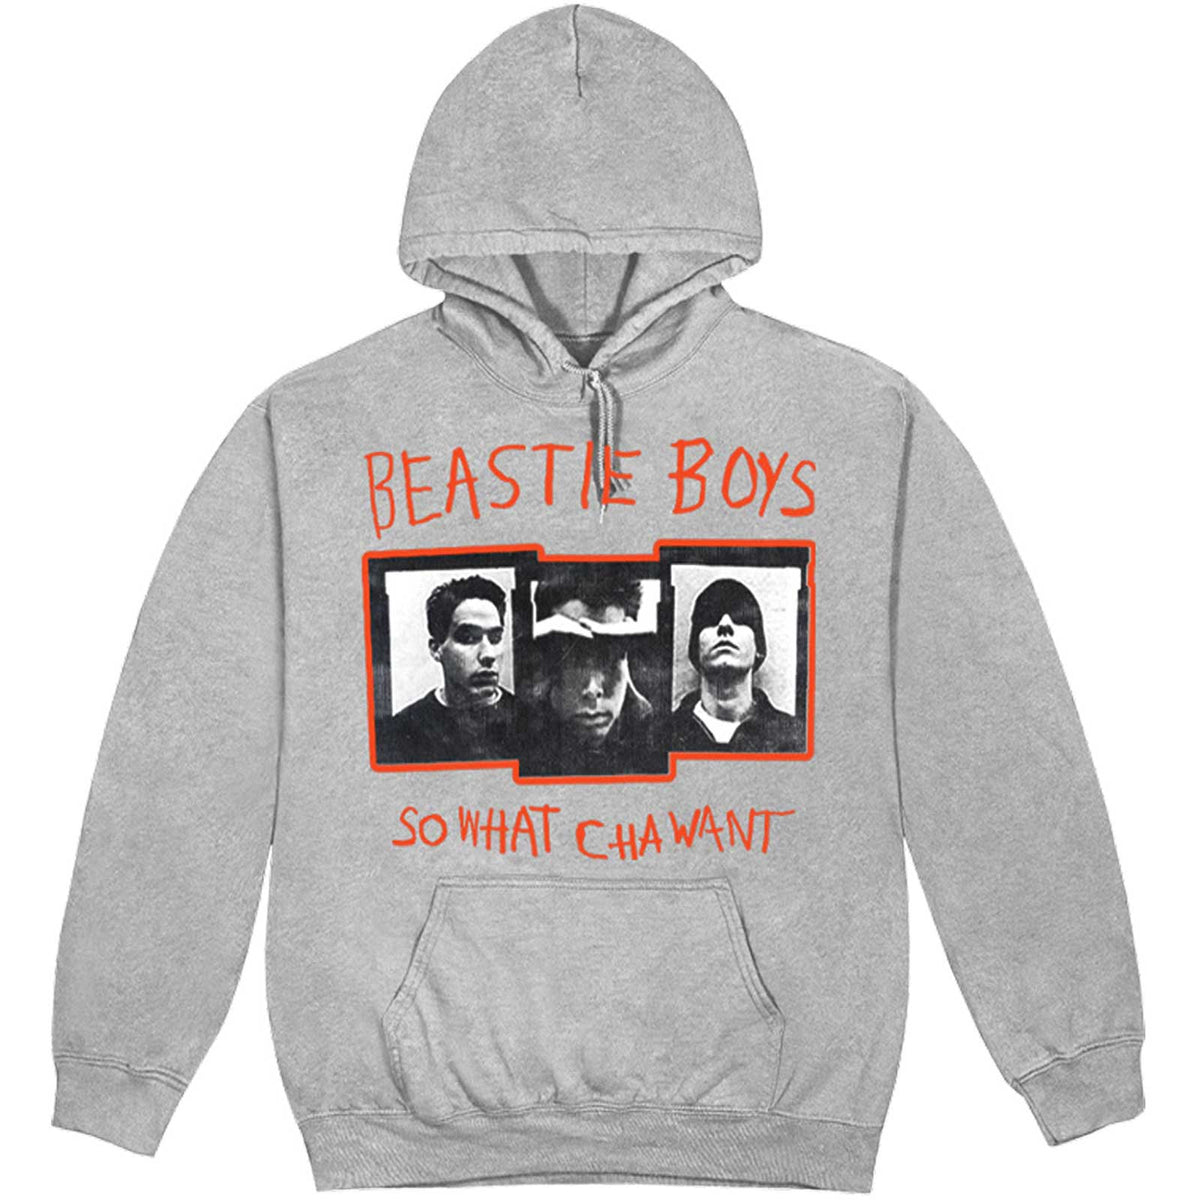 The Beastie Boys Unisex Hoodie - So What Cha Want - Official Licensed Design